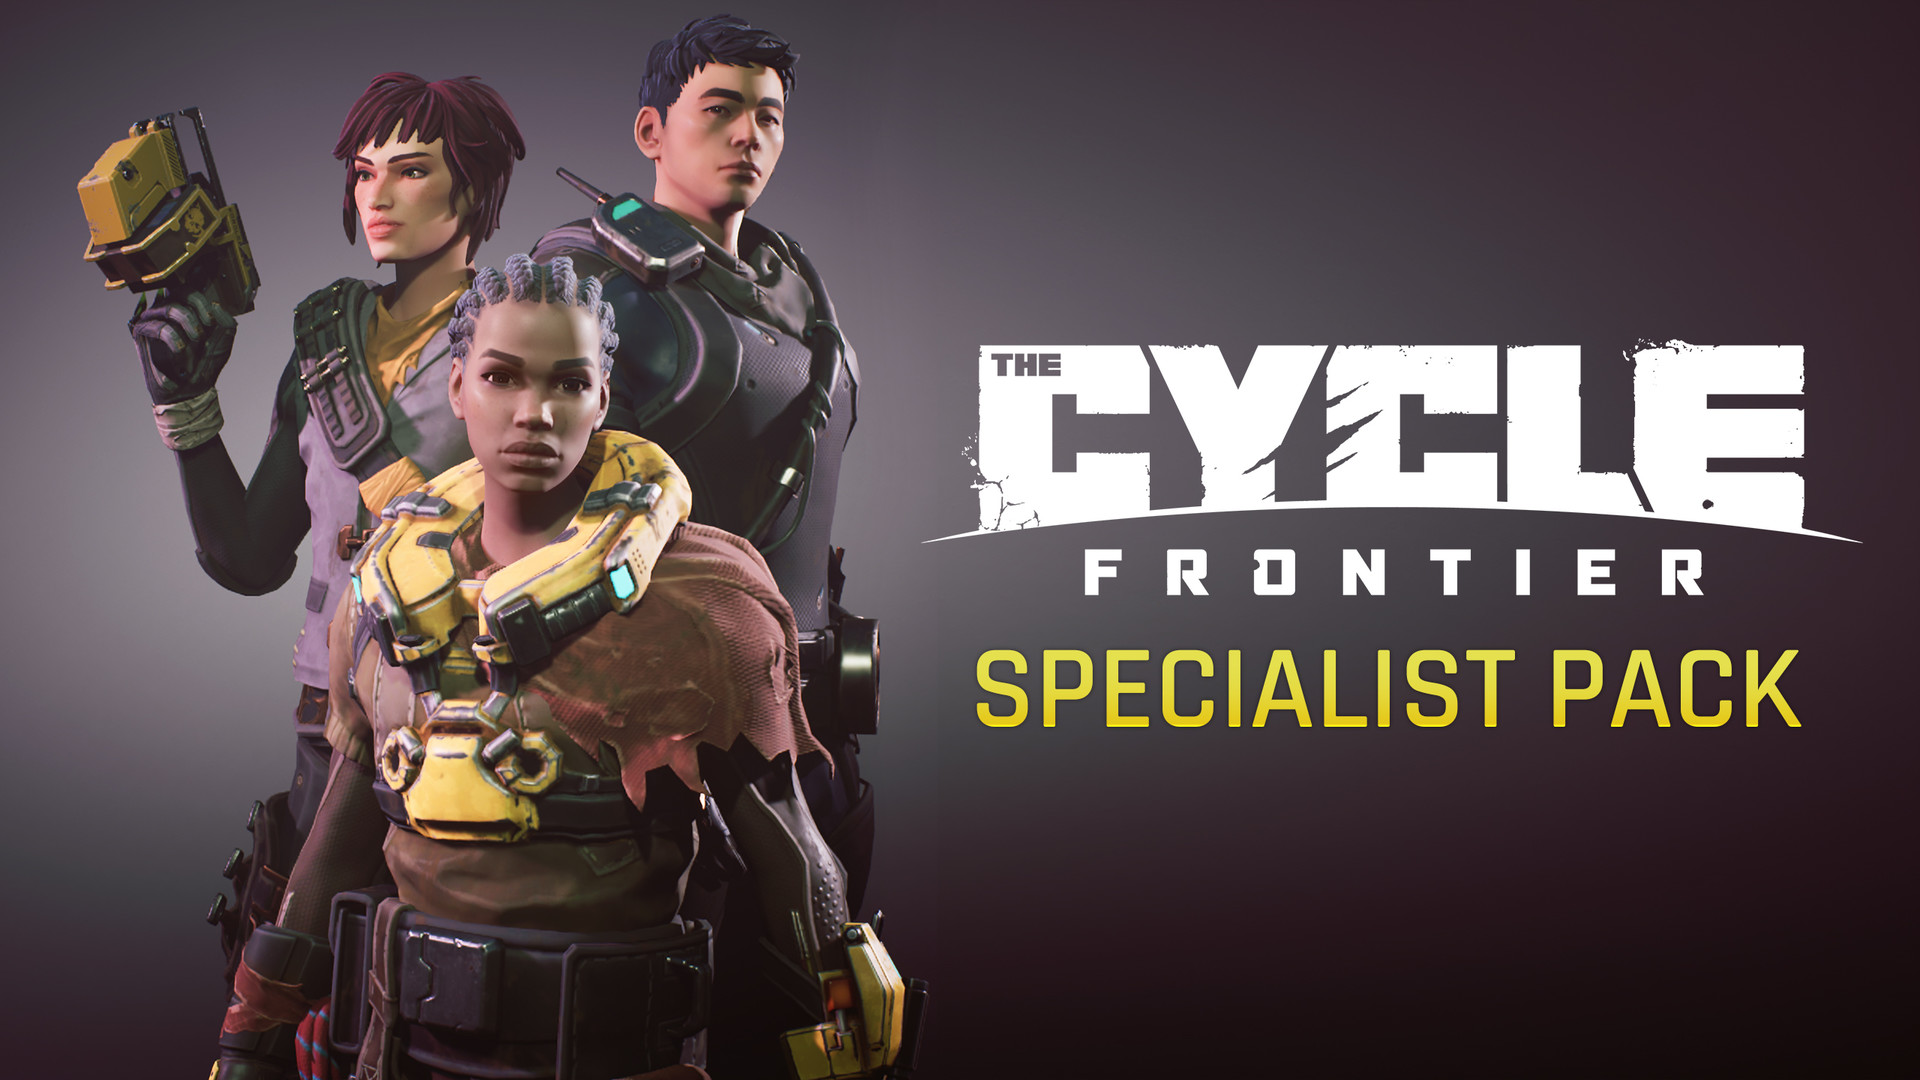 [$ 5.64] The Cycle: Frontier - Specialist Pack DLC Steam CD Key